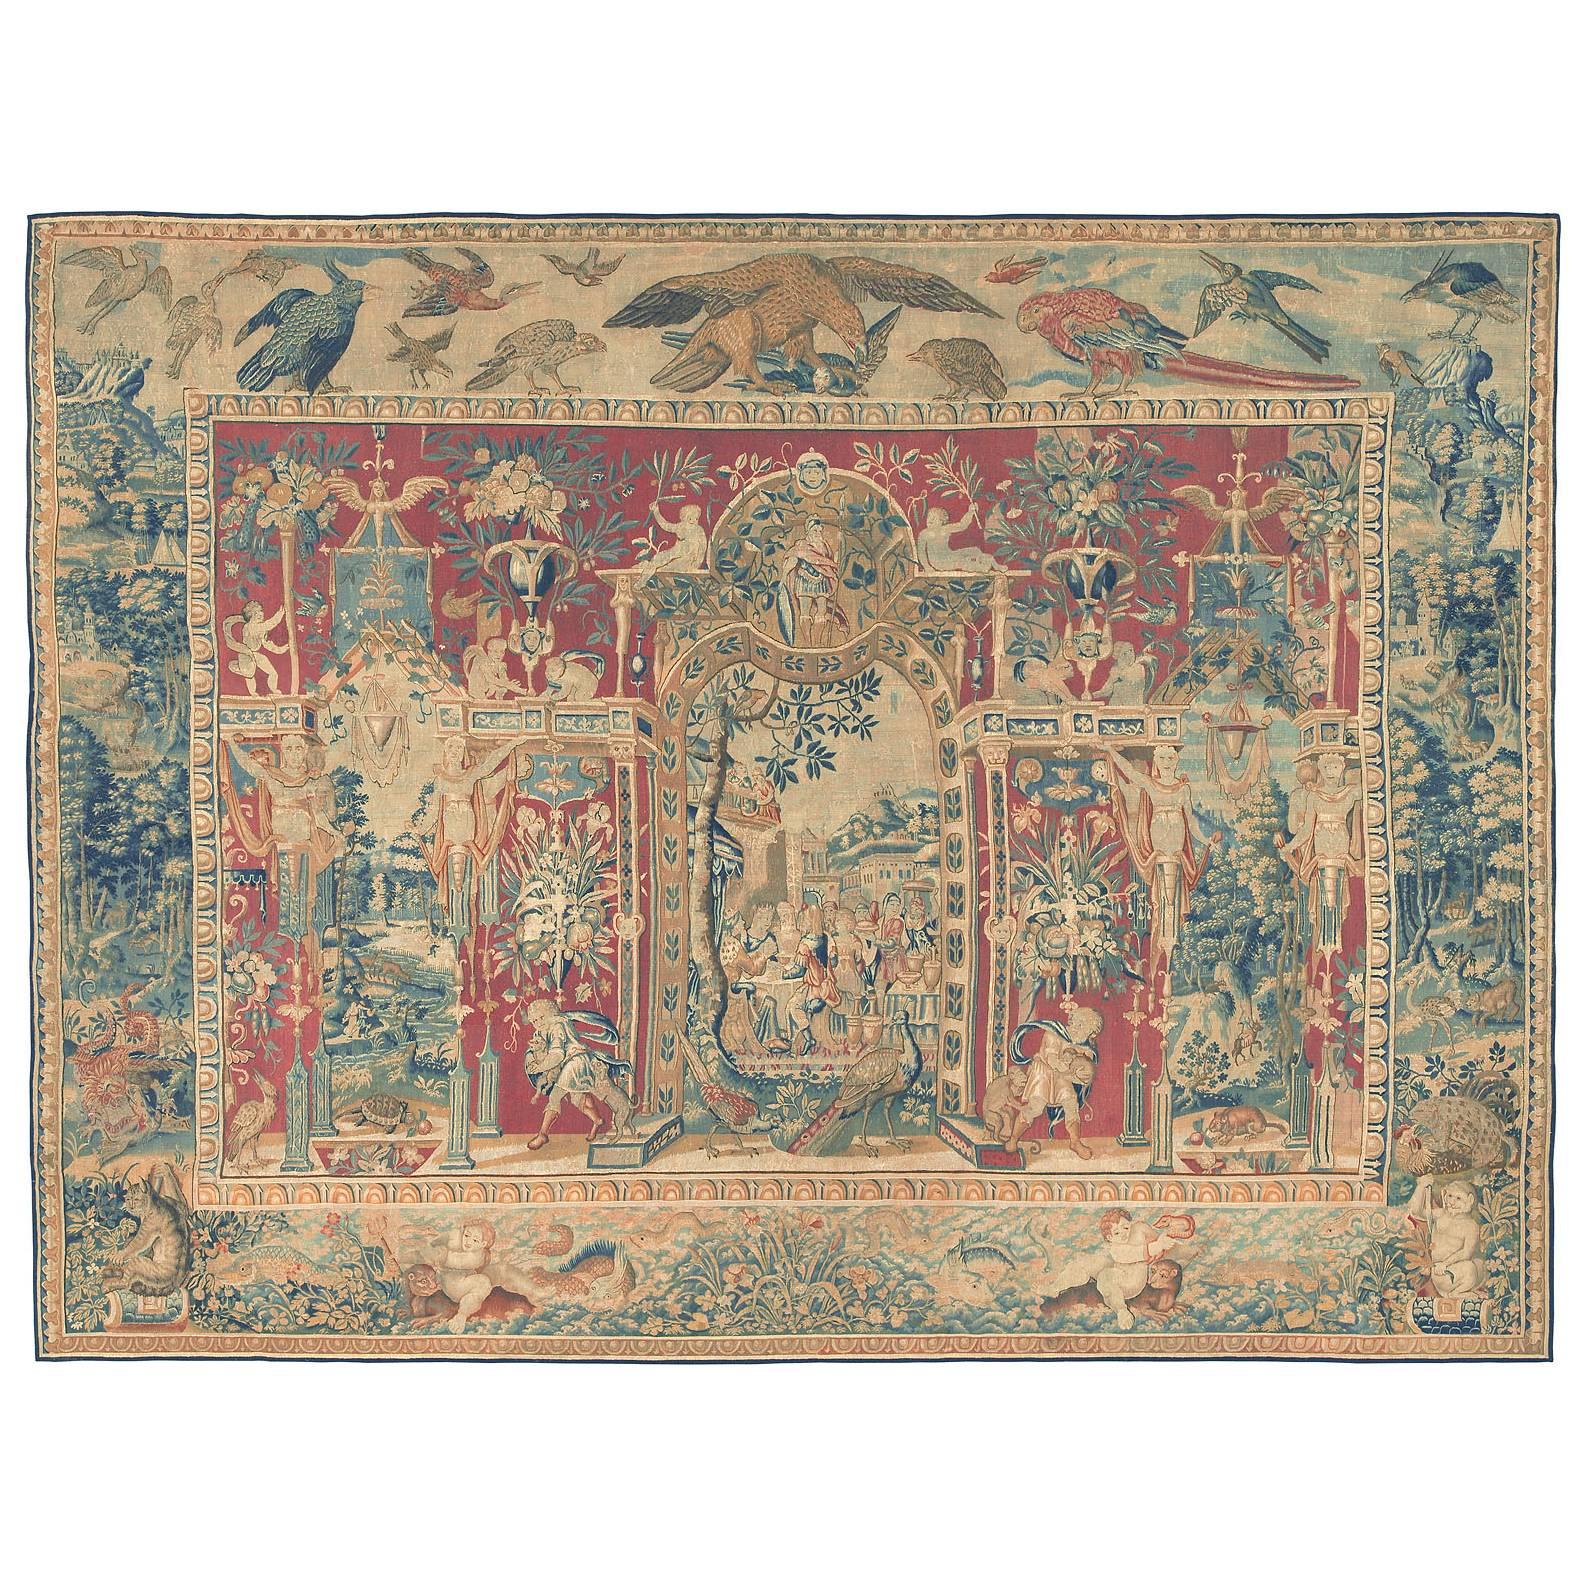 Late 16th Century Tapestry